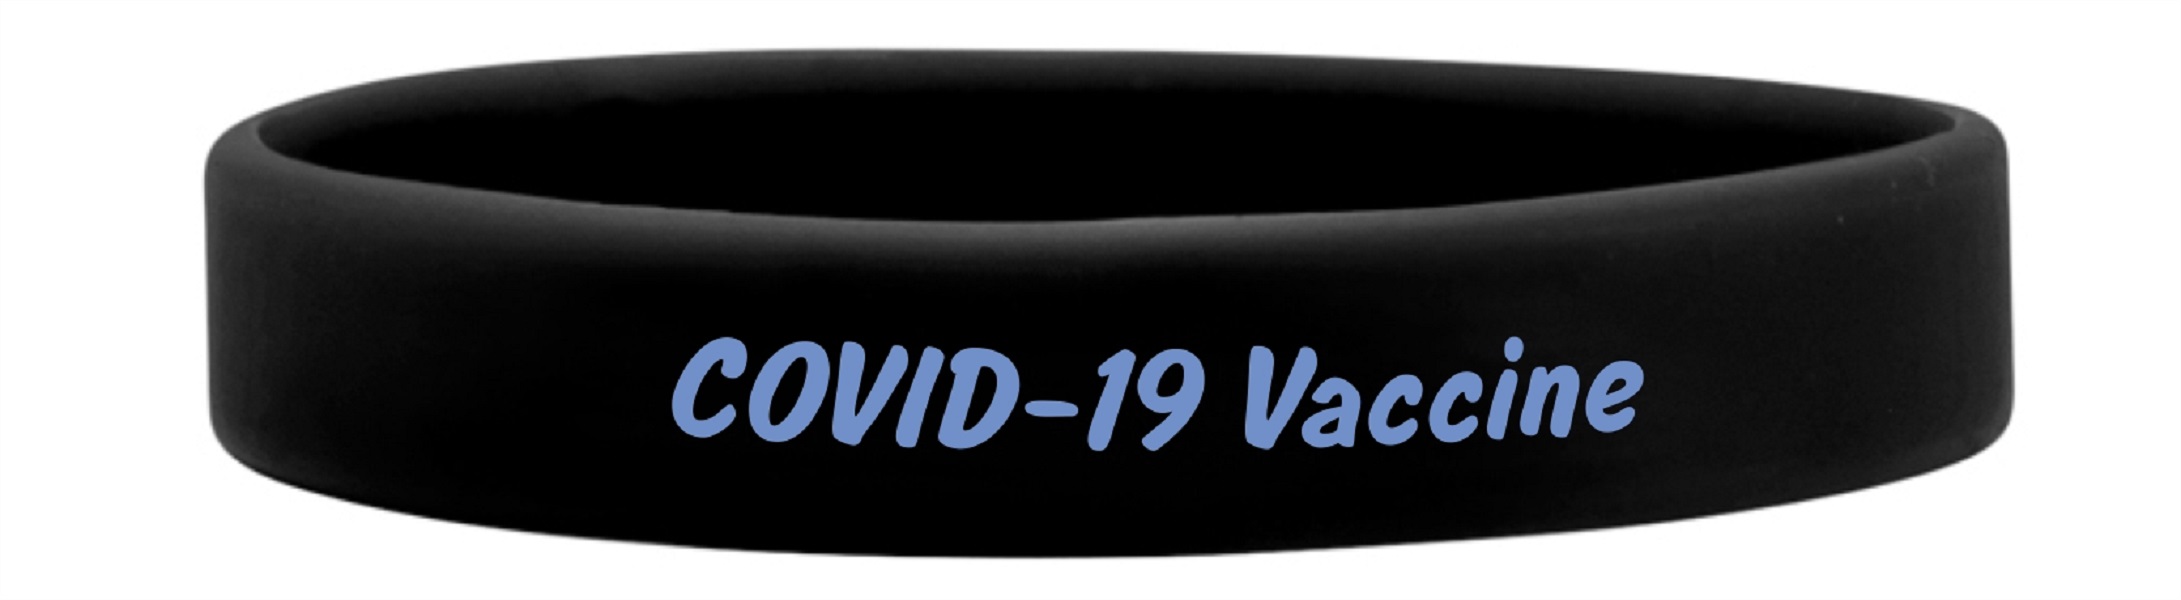 Personalized Silicone Wristbands